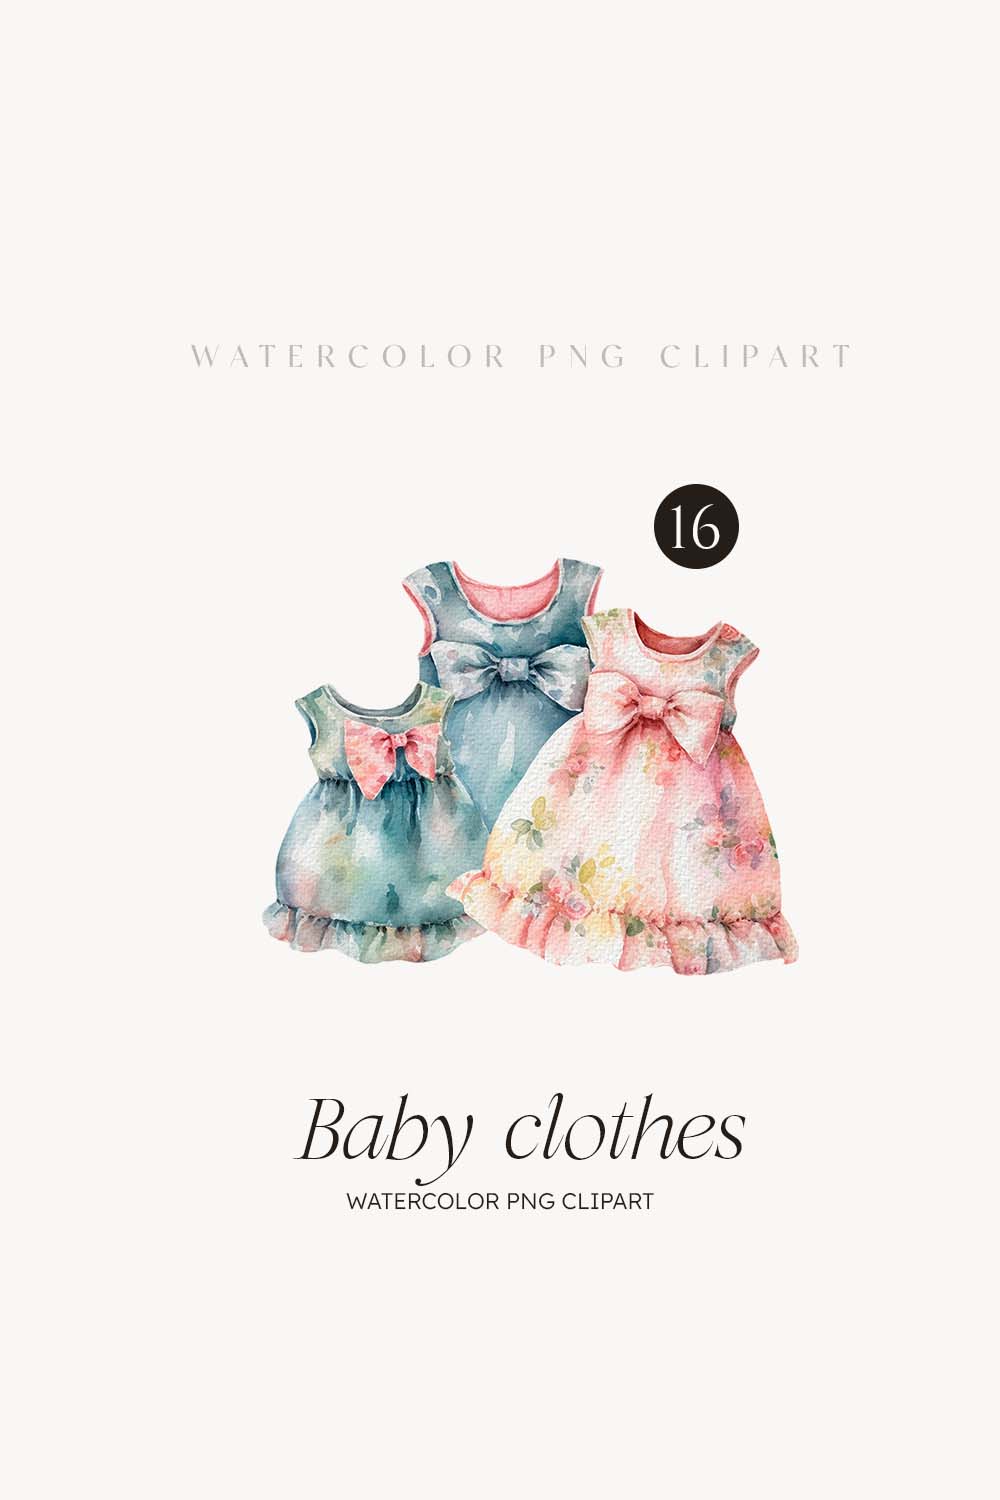 Baby clothes pinterest preview image.